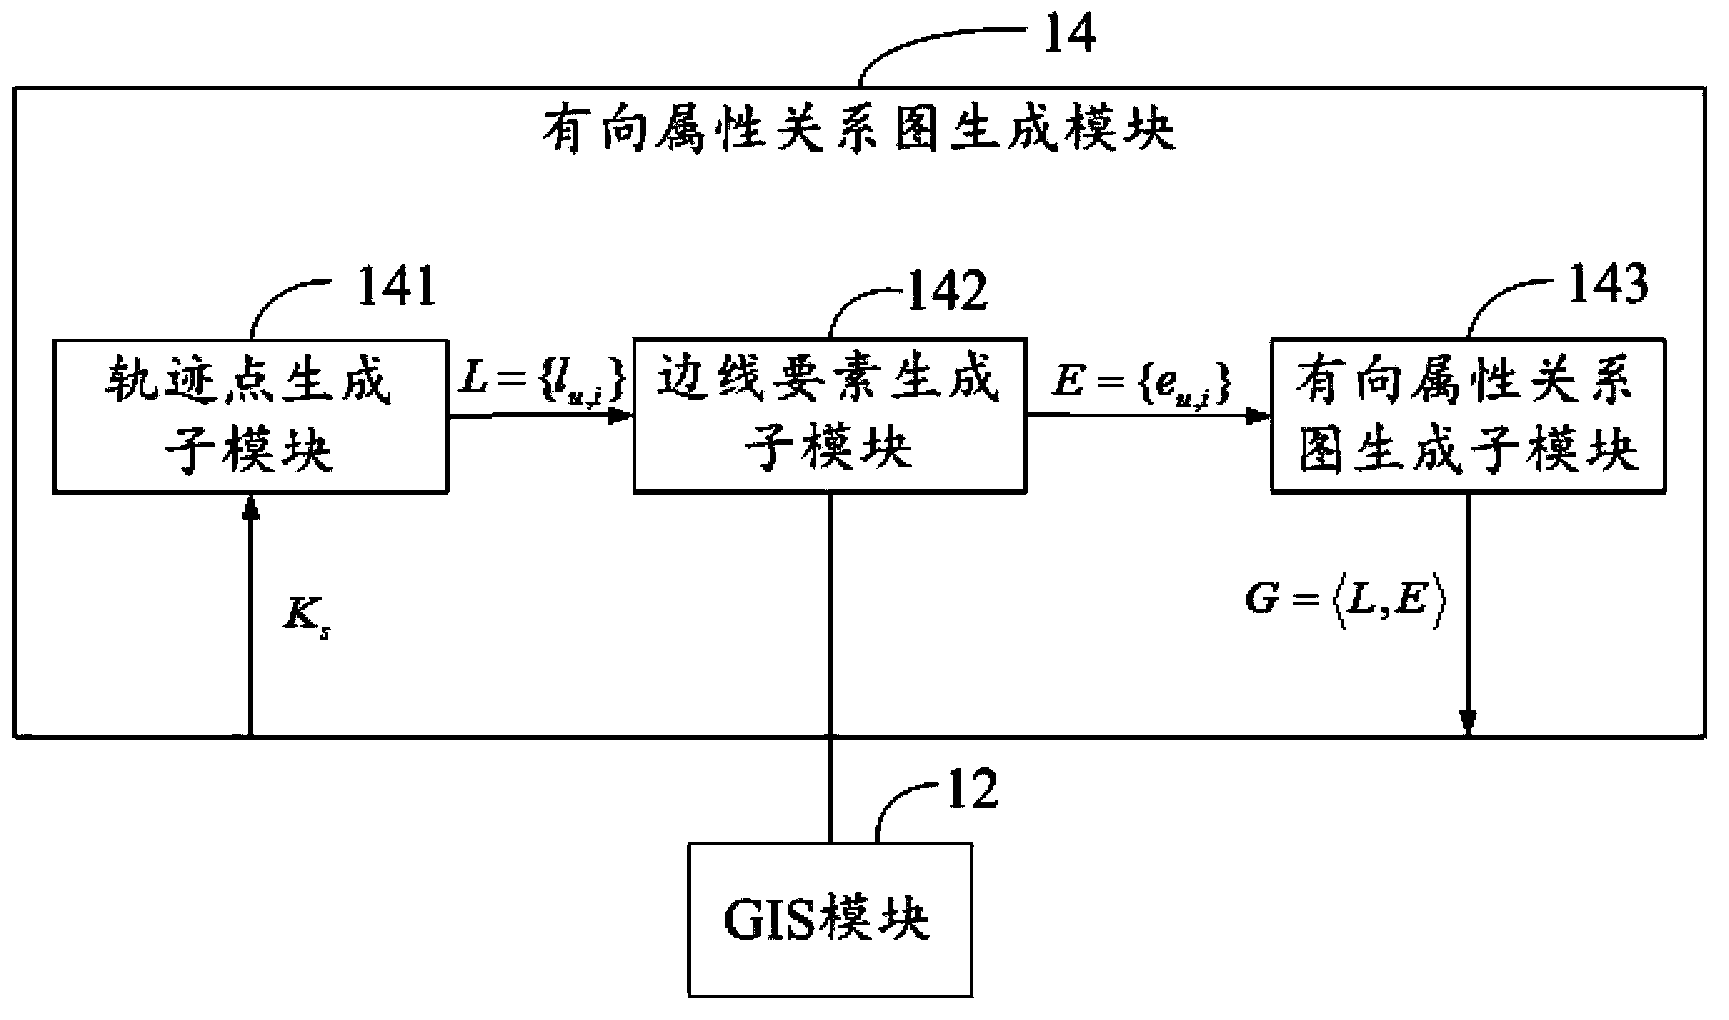 Method and system for identifying road intersection steering based on vehicle data collection